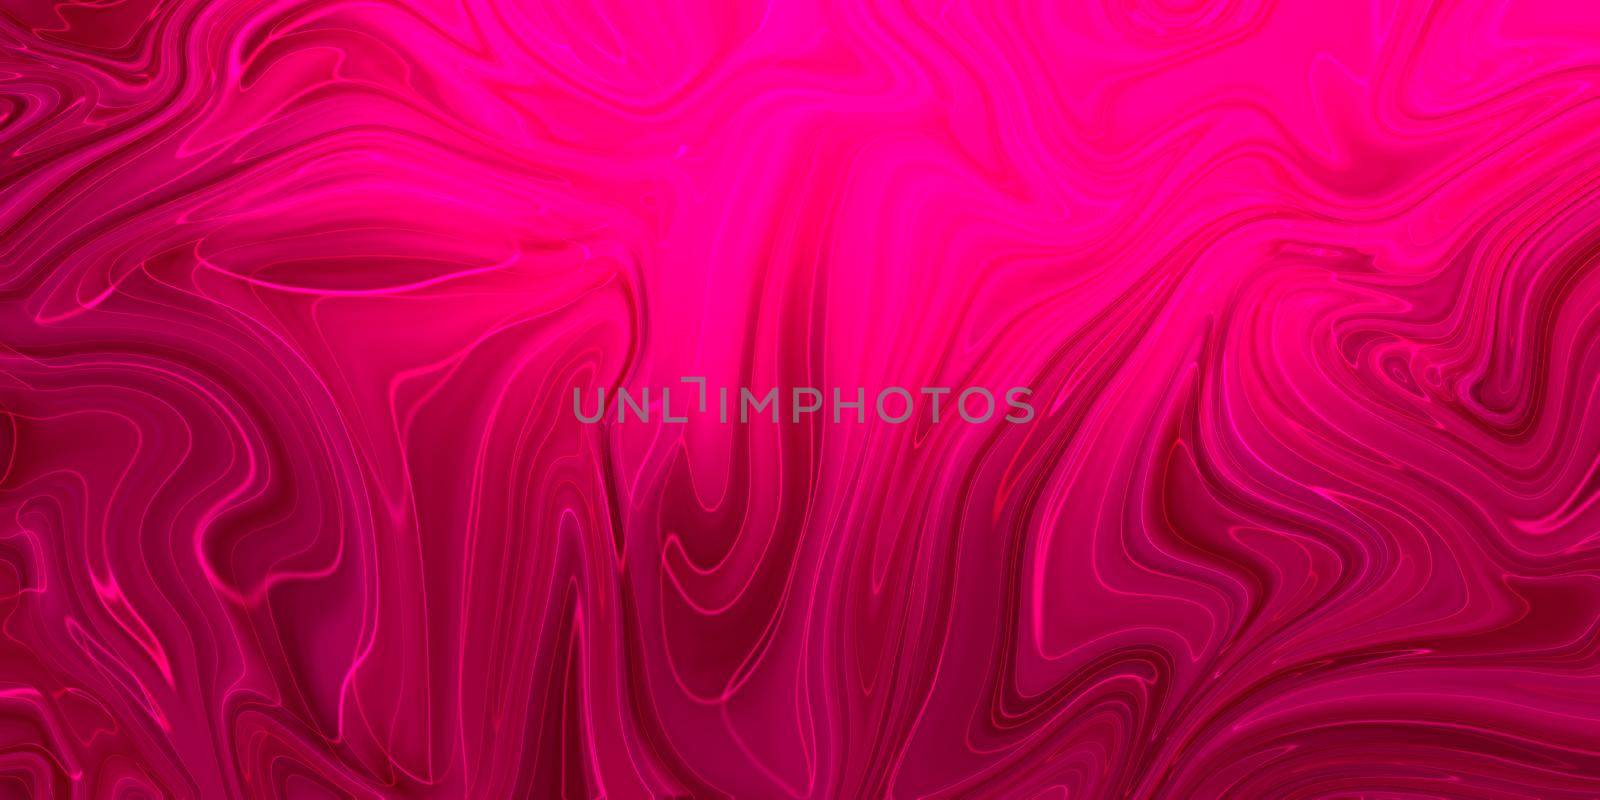 Swirls of marble or the ripples of agate. Liquid marble texture with pink colors. Abstract painting background for wallpapers, posters, cards, invitations, websites. Fluid art by Benzoix